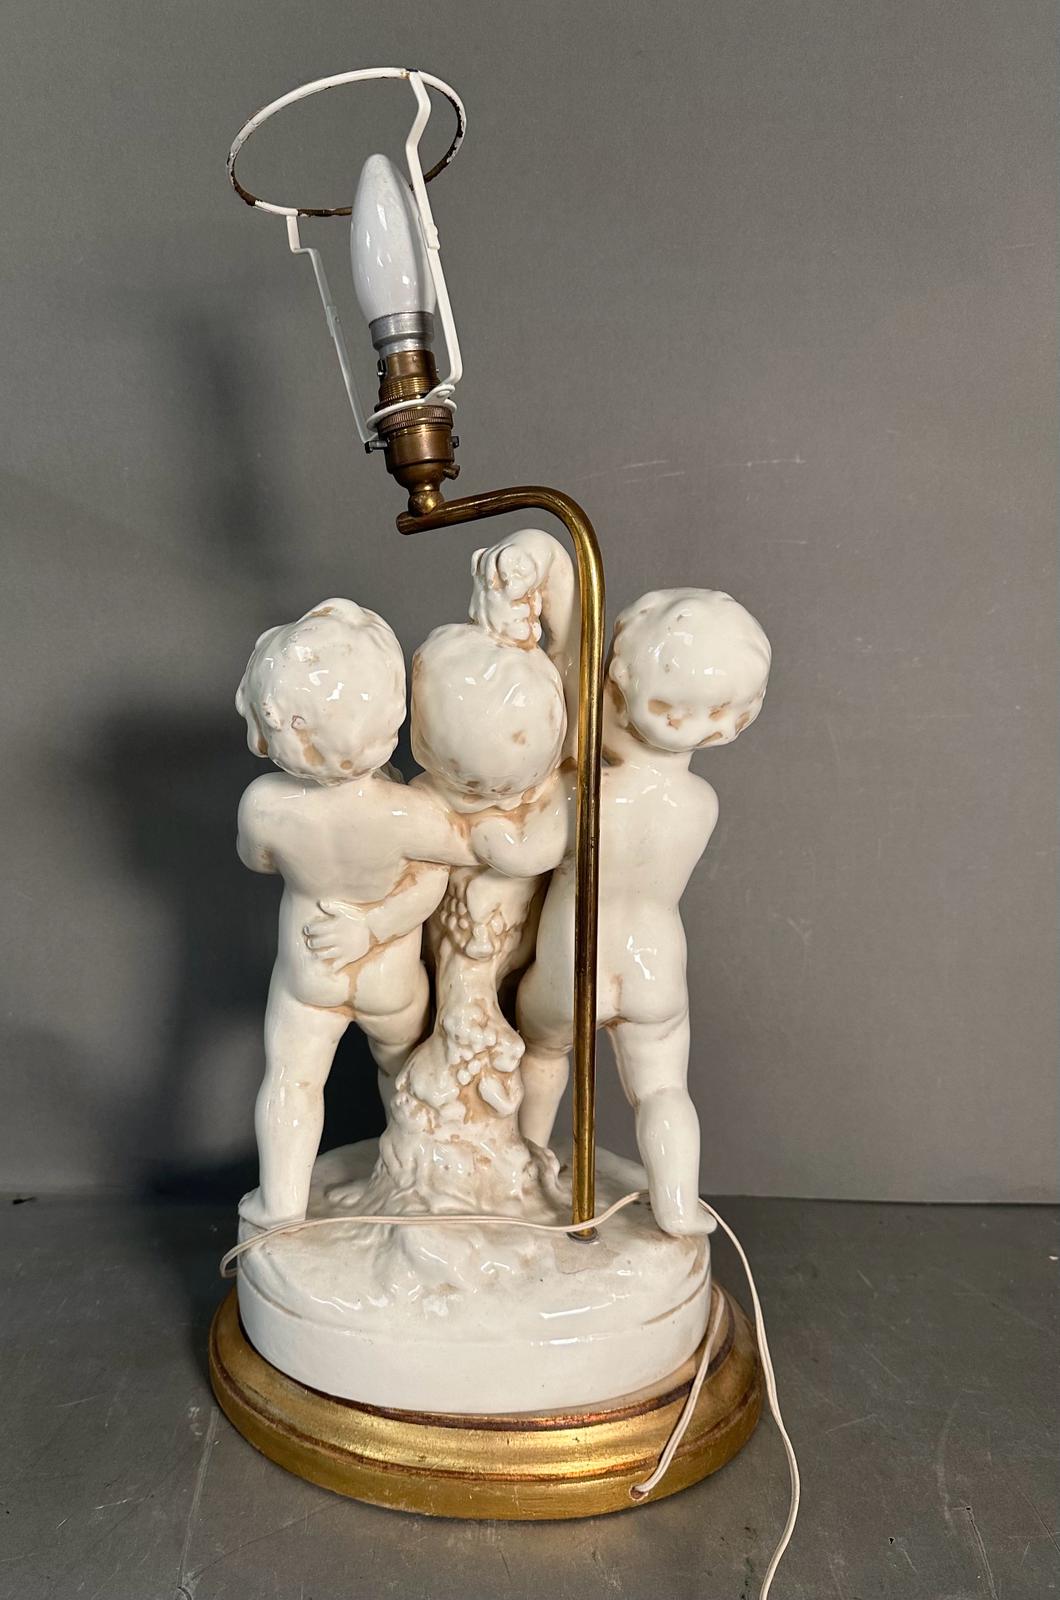 A white ceramic figural cherub table lamp on gold painted base - Image 9 of 10